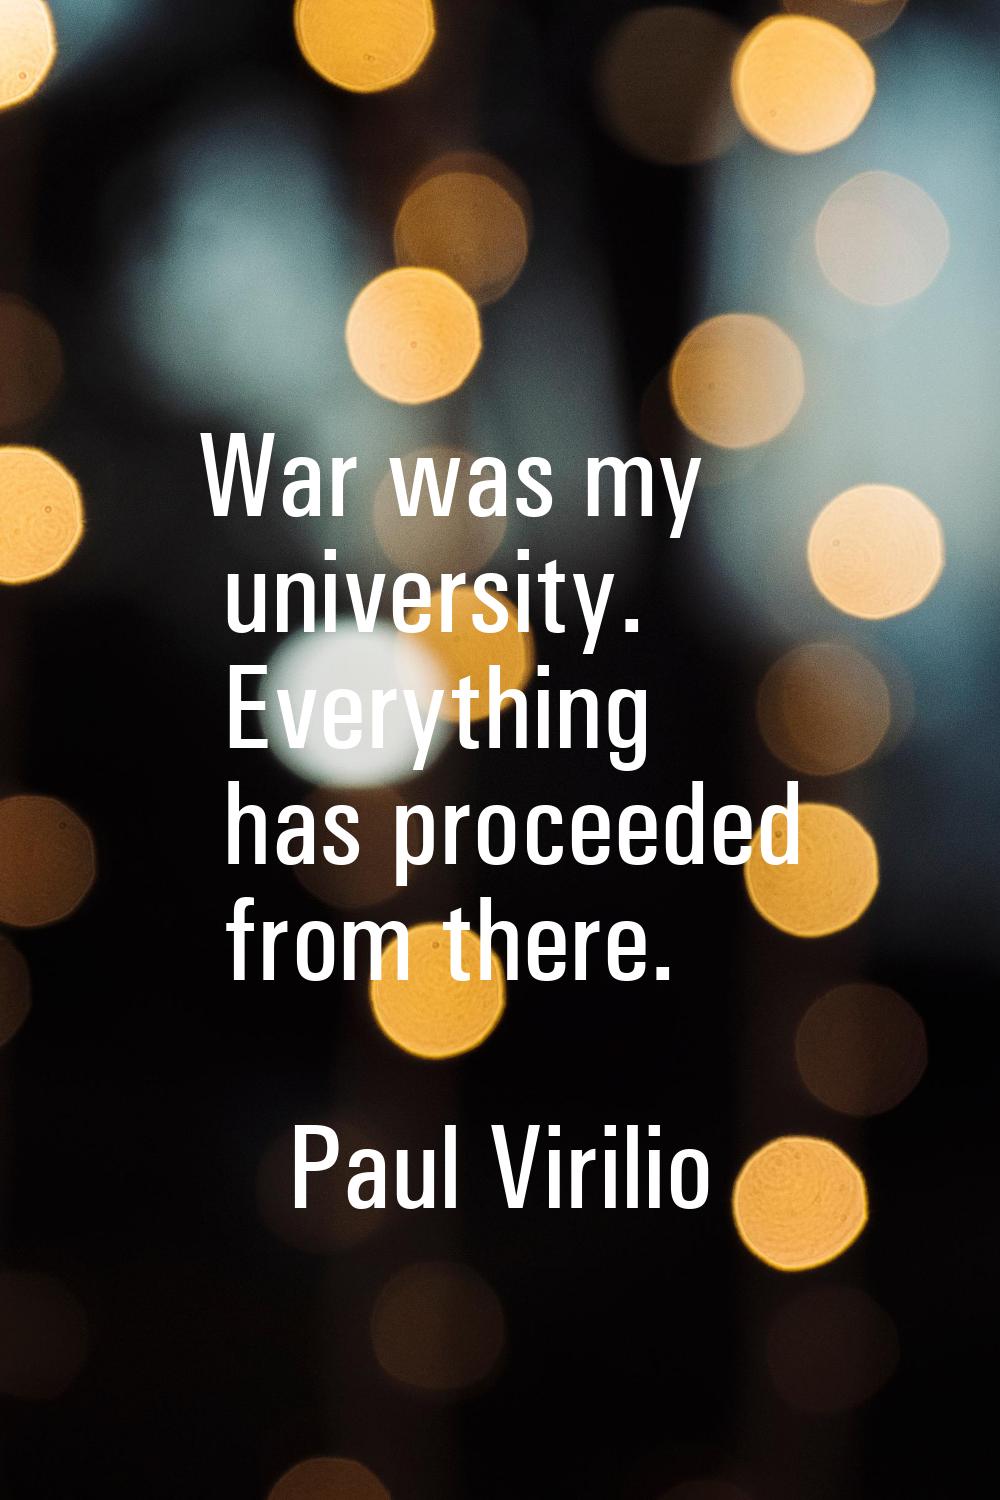 War was my university. Everything has proceeded from there.